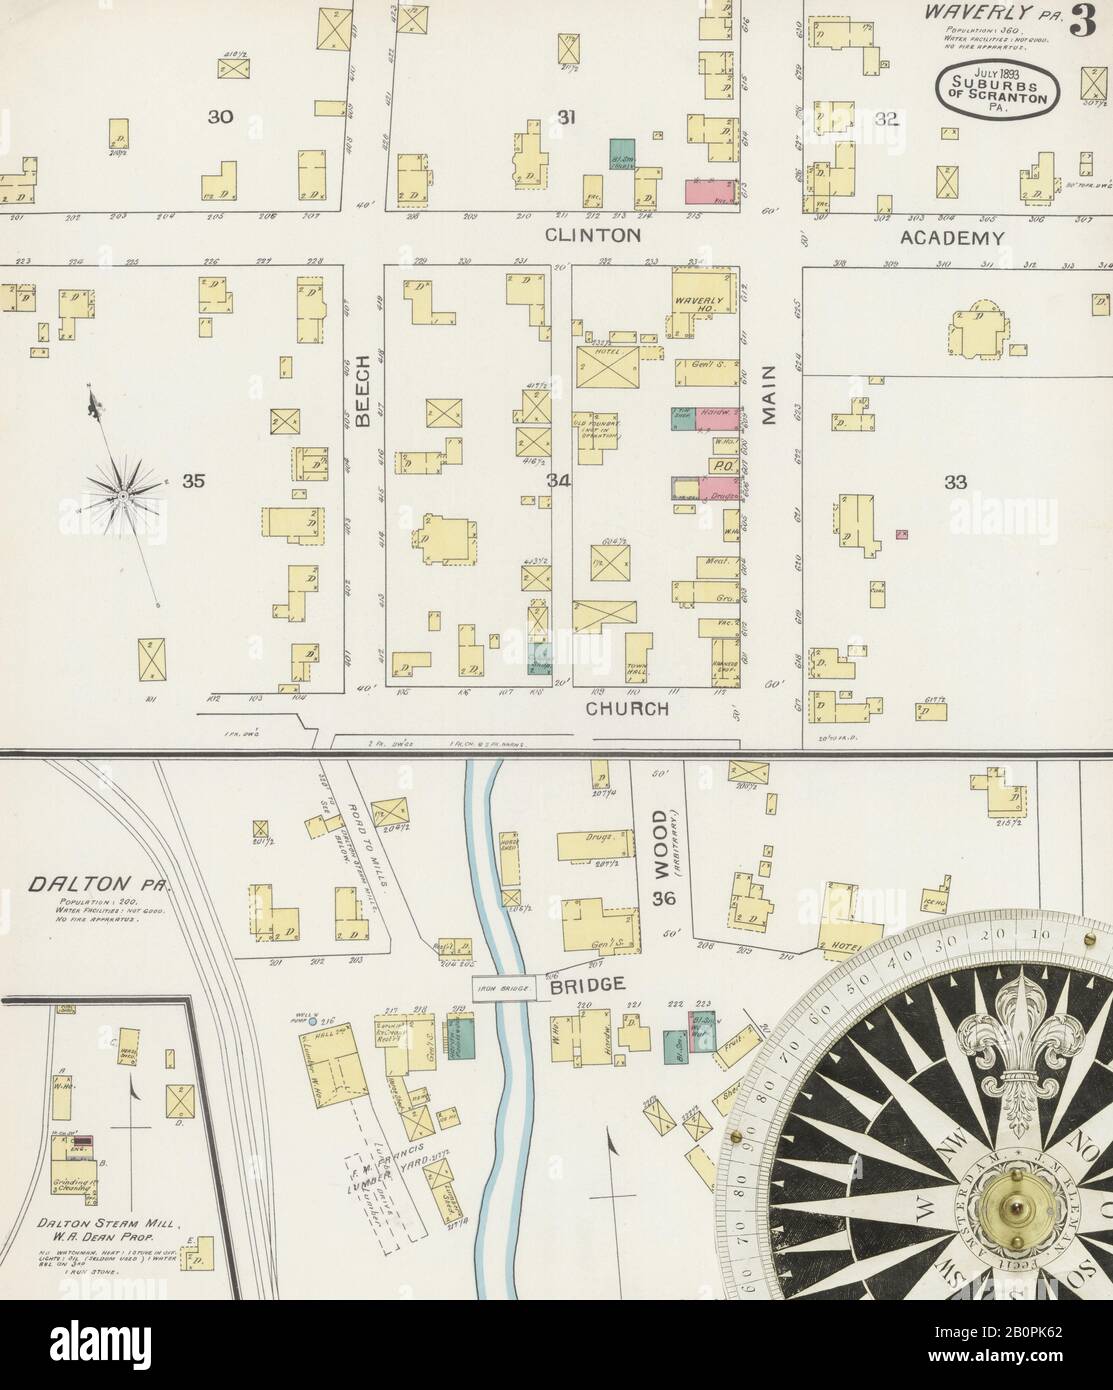 Image 3 of Sanborn Fire Insurance Map from Scranton Suburbs, Lackawanna County, Pennsylvania. Jul 1893. 5 Sheet(s). Includes Archbald, Dalton, Moosic, Moscow, Peckville, Taylorville, Waverly, America, street map with a Nineteenth Century compass Stock Photo